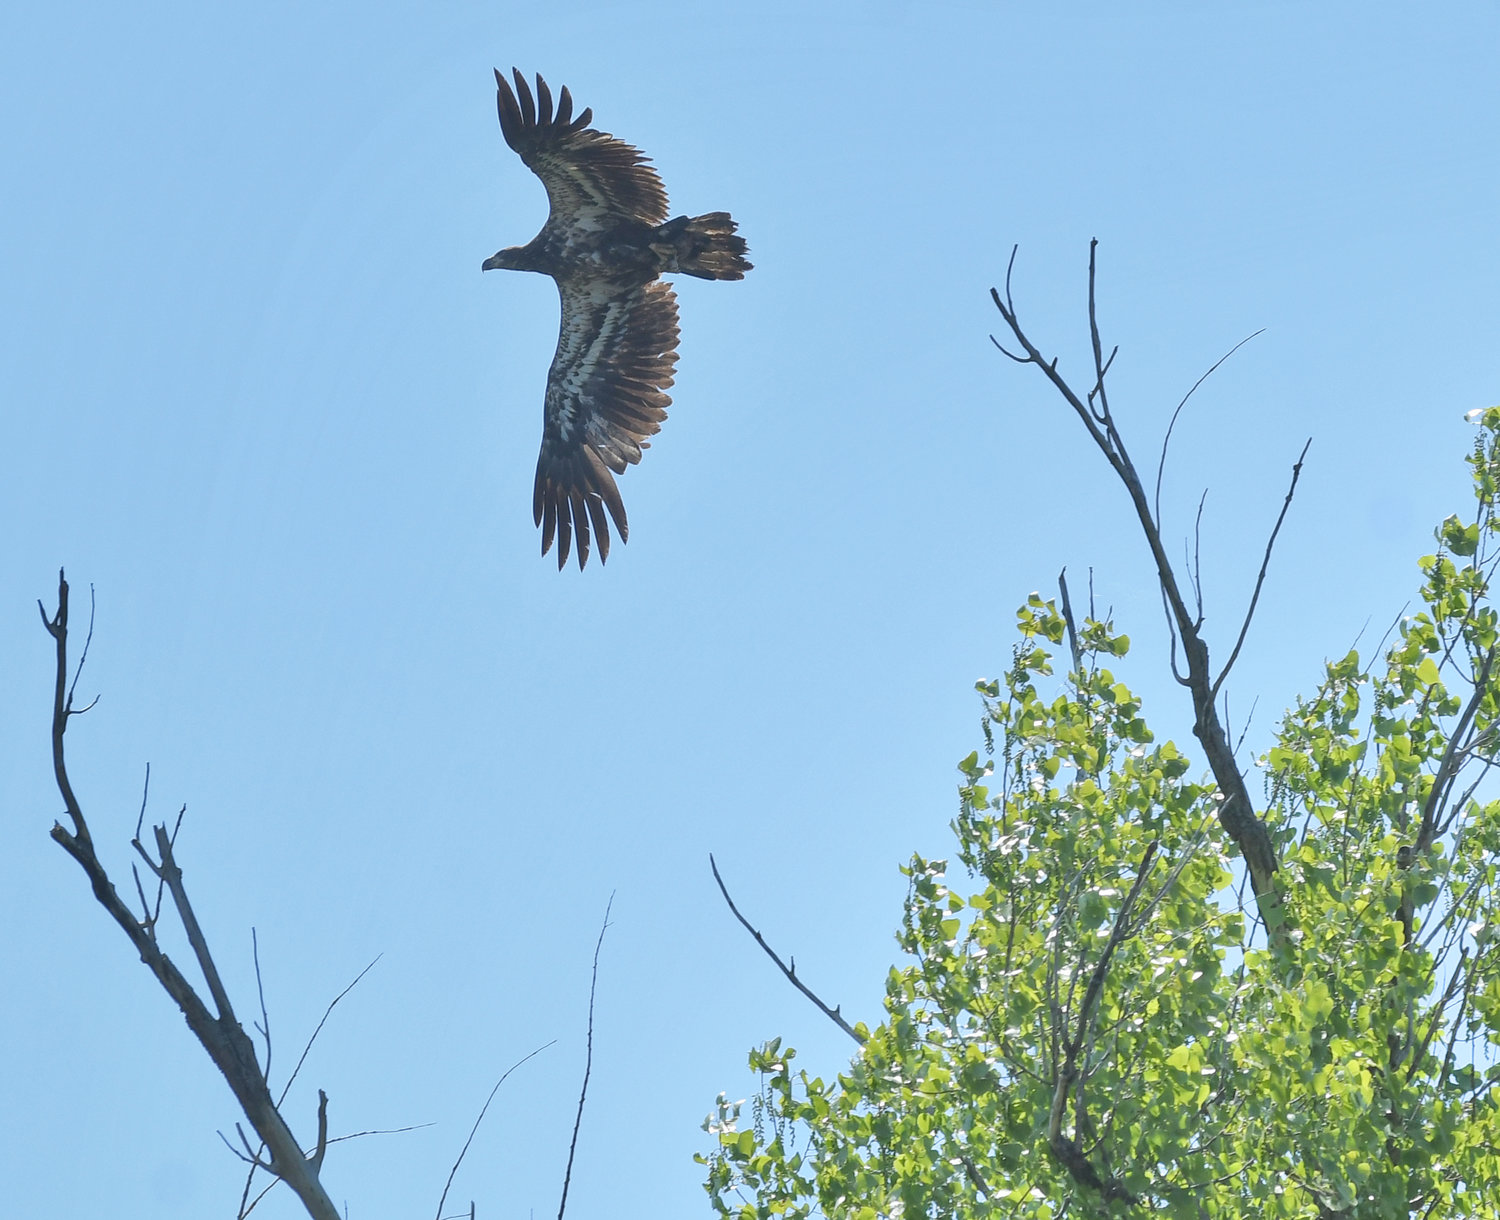 A juvenile American Bald Eagle was spotted doing a fly-by in Sylvan Beach on Tuesday, May 24.